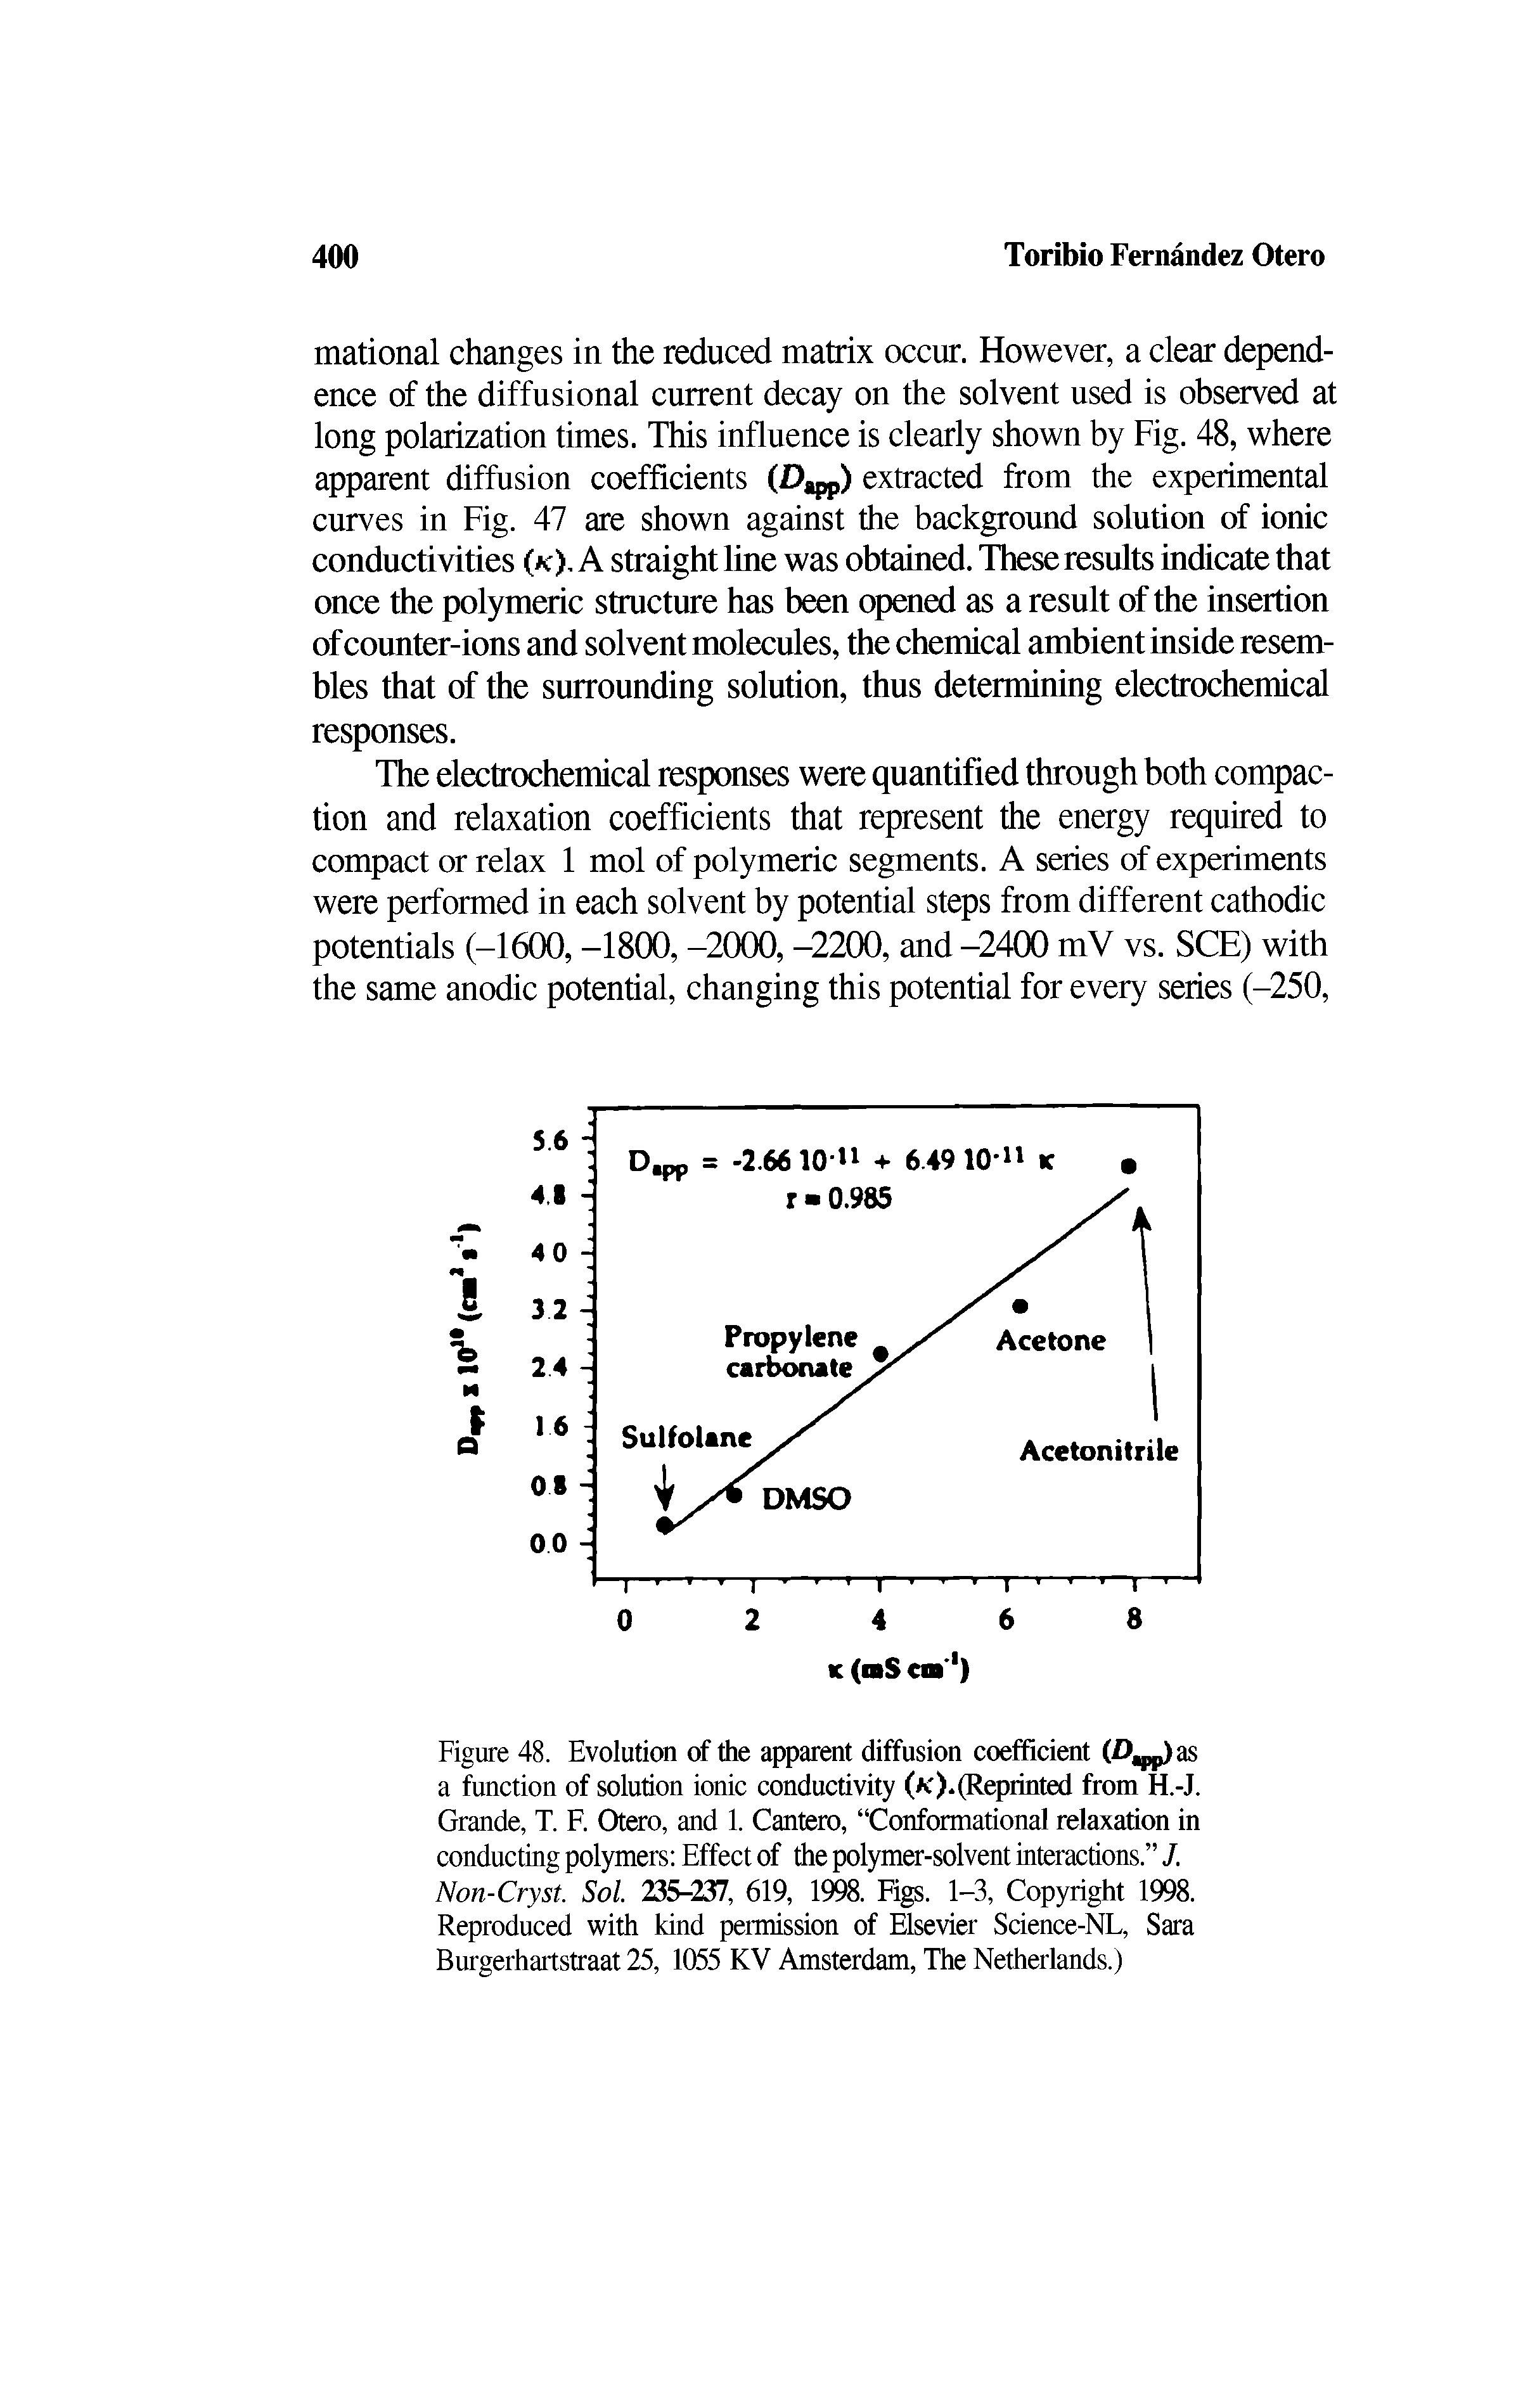 Figure 48. Evolution of the apparent diffusion coefficient (V as a function of solution ionic conductivity (x ) (Reprinted from H.-J. Grande, T. F. Otero, and 1. Cantero, Conformational relaxation in conducting polymers Effect of the polymer-solvent interactions. J. Non-Cryst. Sol. 235-237, 619, 1998. Figs. 1-3, Copyright 1998. Reproduced with kind permission of Elsevier Science-NL, Sara Burgerhartstraat 25, 1055 KV Amsterdam, The Netherlands.)...